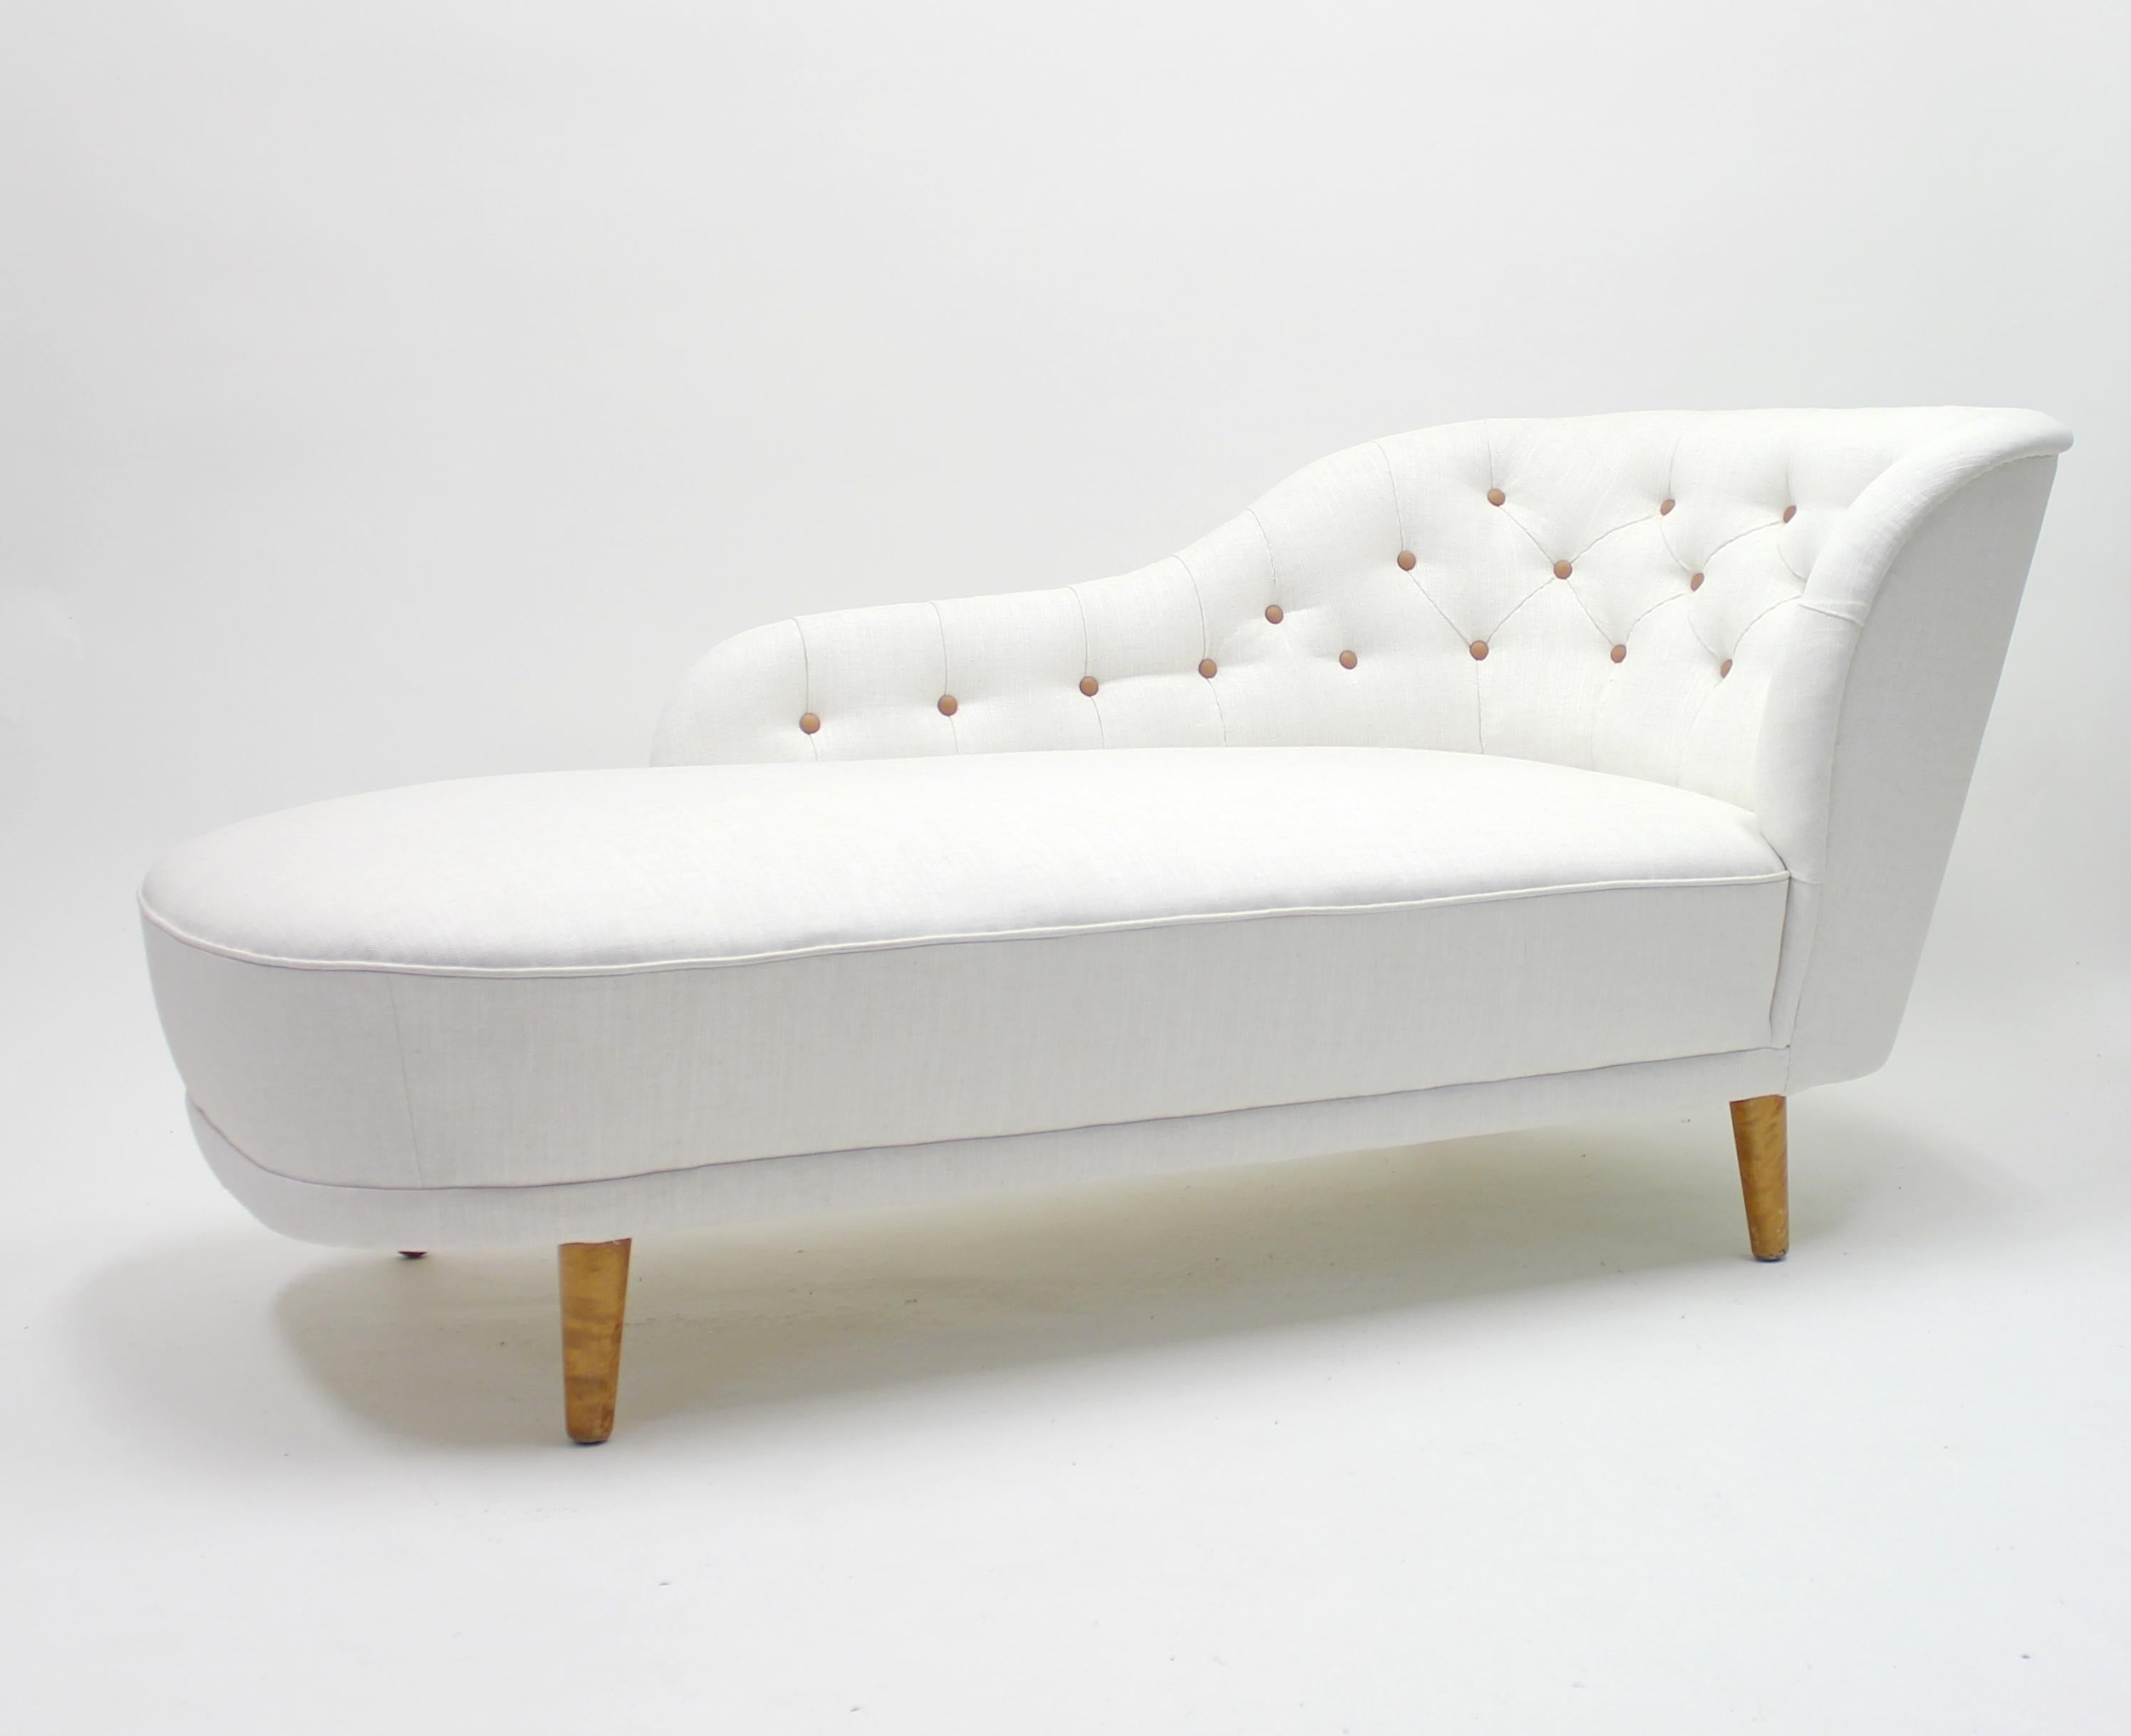 Leather Rare Chaise Lounge, Attributed to Greta Magnusson Grossman, 1940s